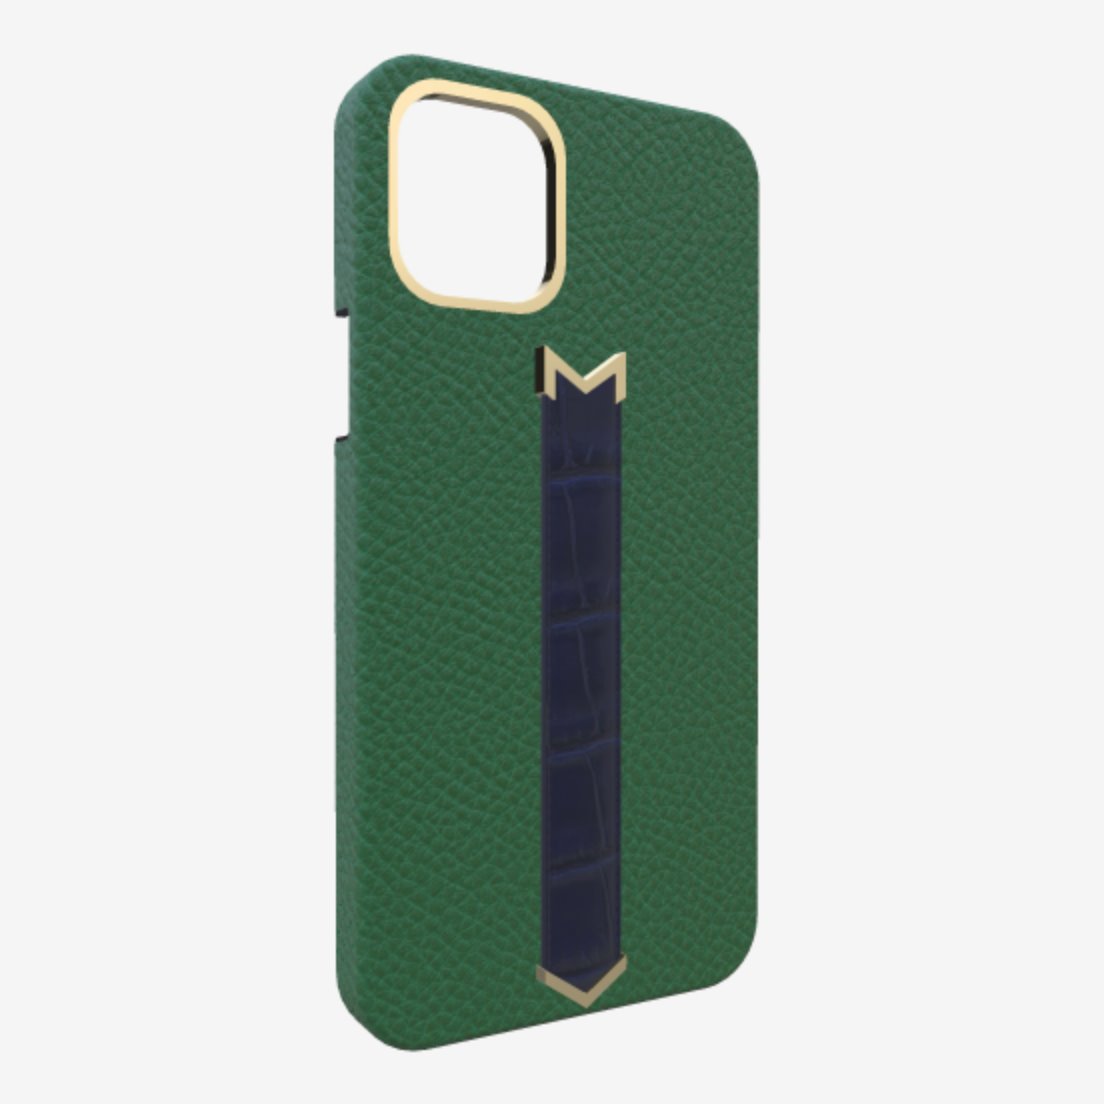 Gold Finger Strap Case for iPhone 13 Pro in Genuine Calfskin and Alligator Emerald Green Navy Blue 